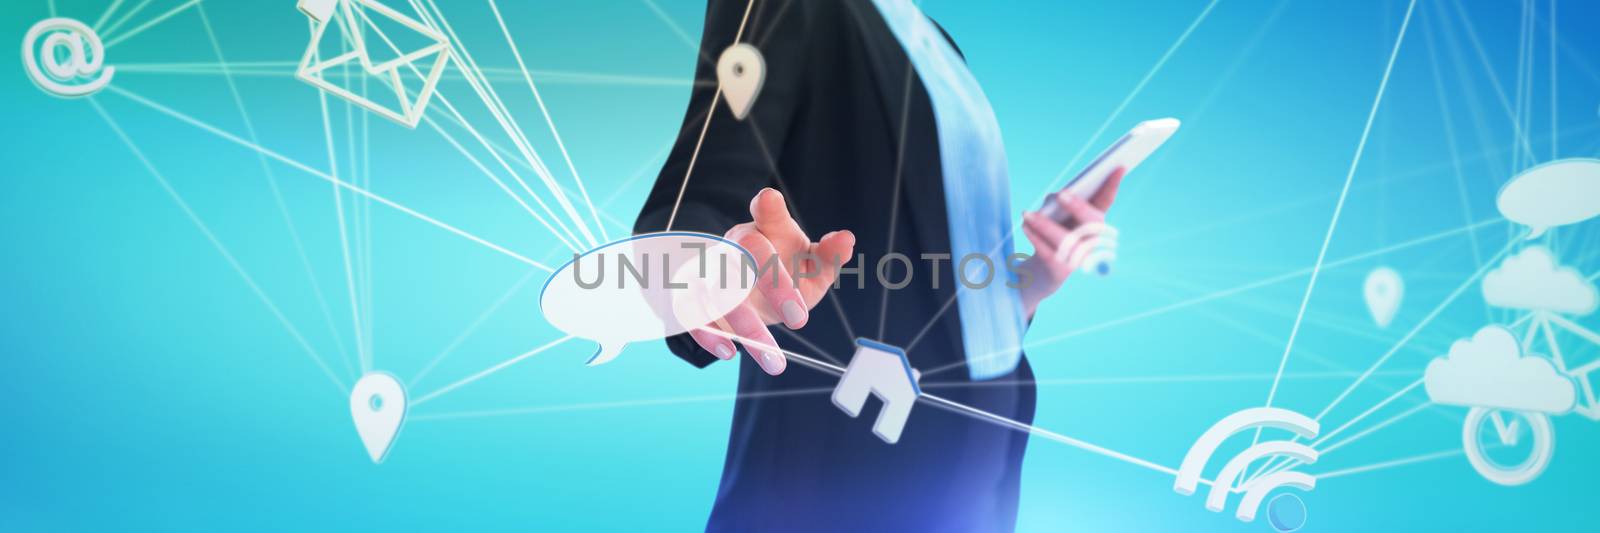 Composite image of mid section of businesswoman using mobile phone while using imaginary interface by Wavebreakmedia